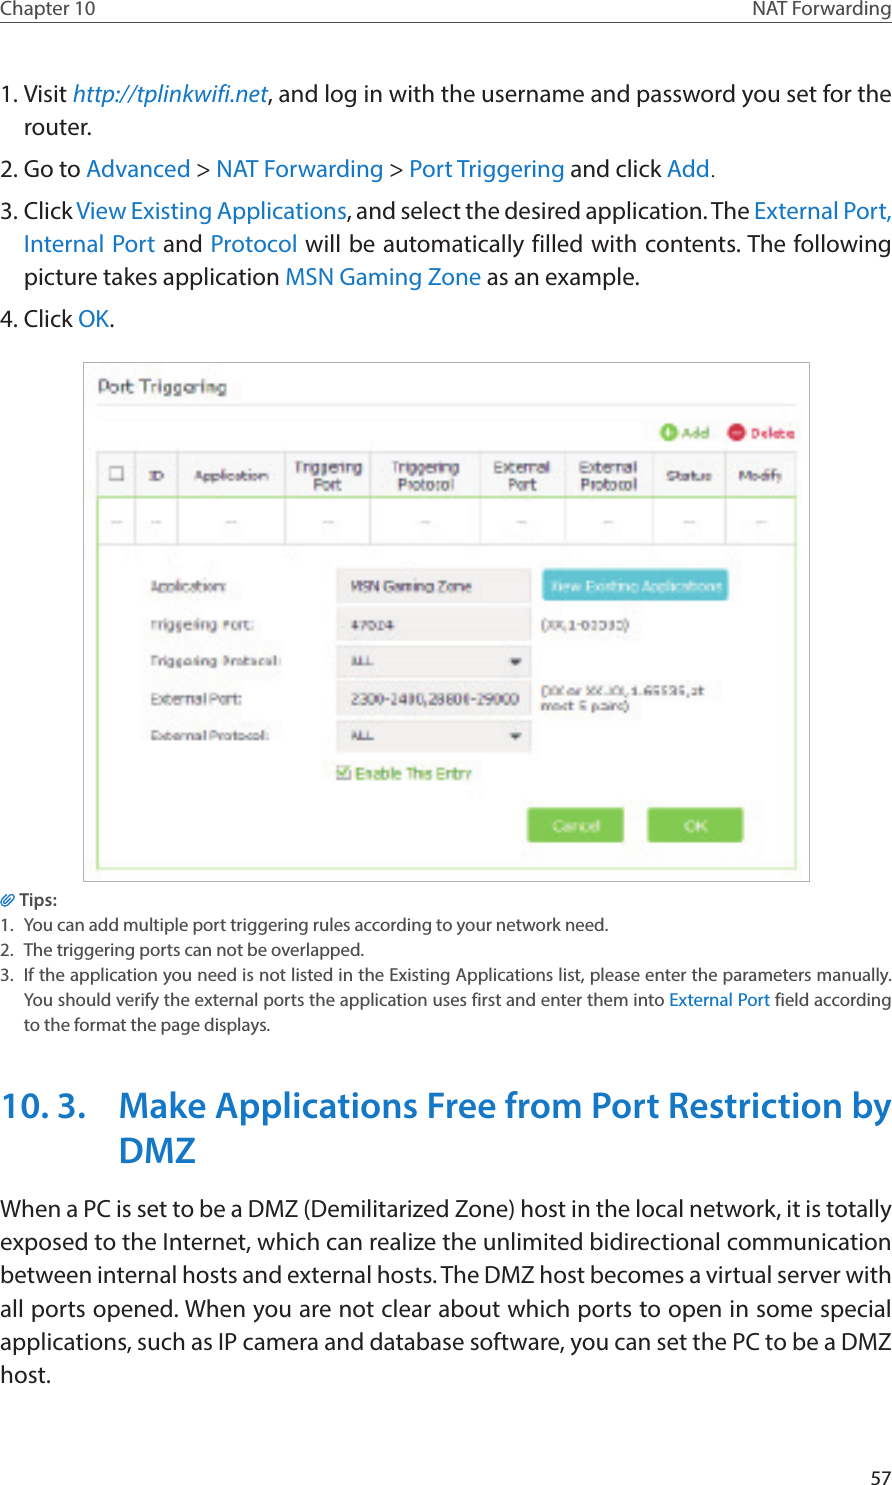 57Chapter 10 NAT Forwarding1. Visit http://tplinkwifi.net, and log in with the username and password you set for the router.2. Go to Advanced &gt; NAT Forwarding &gt; Port Triggering and click Add.3. Click View Existing Applications, and select the desired application. The External Port, Internal Port and Protocol will be automatically filled with contents. The following picture takes application MSN Gaming Zone as an example.4. Click OK.Tips:1.  You can add multiple port triggering rules according to your network need.2.  The triggering ports can not be overlapped.3.  If the application you need is not listed in the Existing Applications list, please enter the parameters manually. You should verify the external ports the application uses first and enter them into External Port field according to the format the page displays.10. 3.  Make Applications Free from Port Restriction by DMZWhen a PC is set to be a DMZ (Demilitarized Zone) host in the local network, it is totally exposed to the Internet, which can realize the unlimited bidirectional communication between internal hosts and external hosts. The DMZ host becomes a virtual server with all ports opened. When you are not clear about which ports to open in some special applications, such as IP camera and database software, you can set the PC to be a DMZ host.